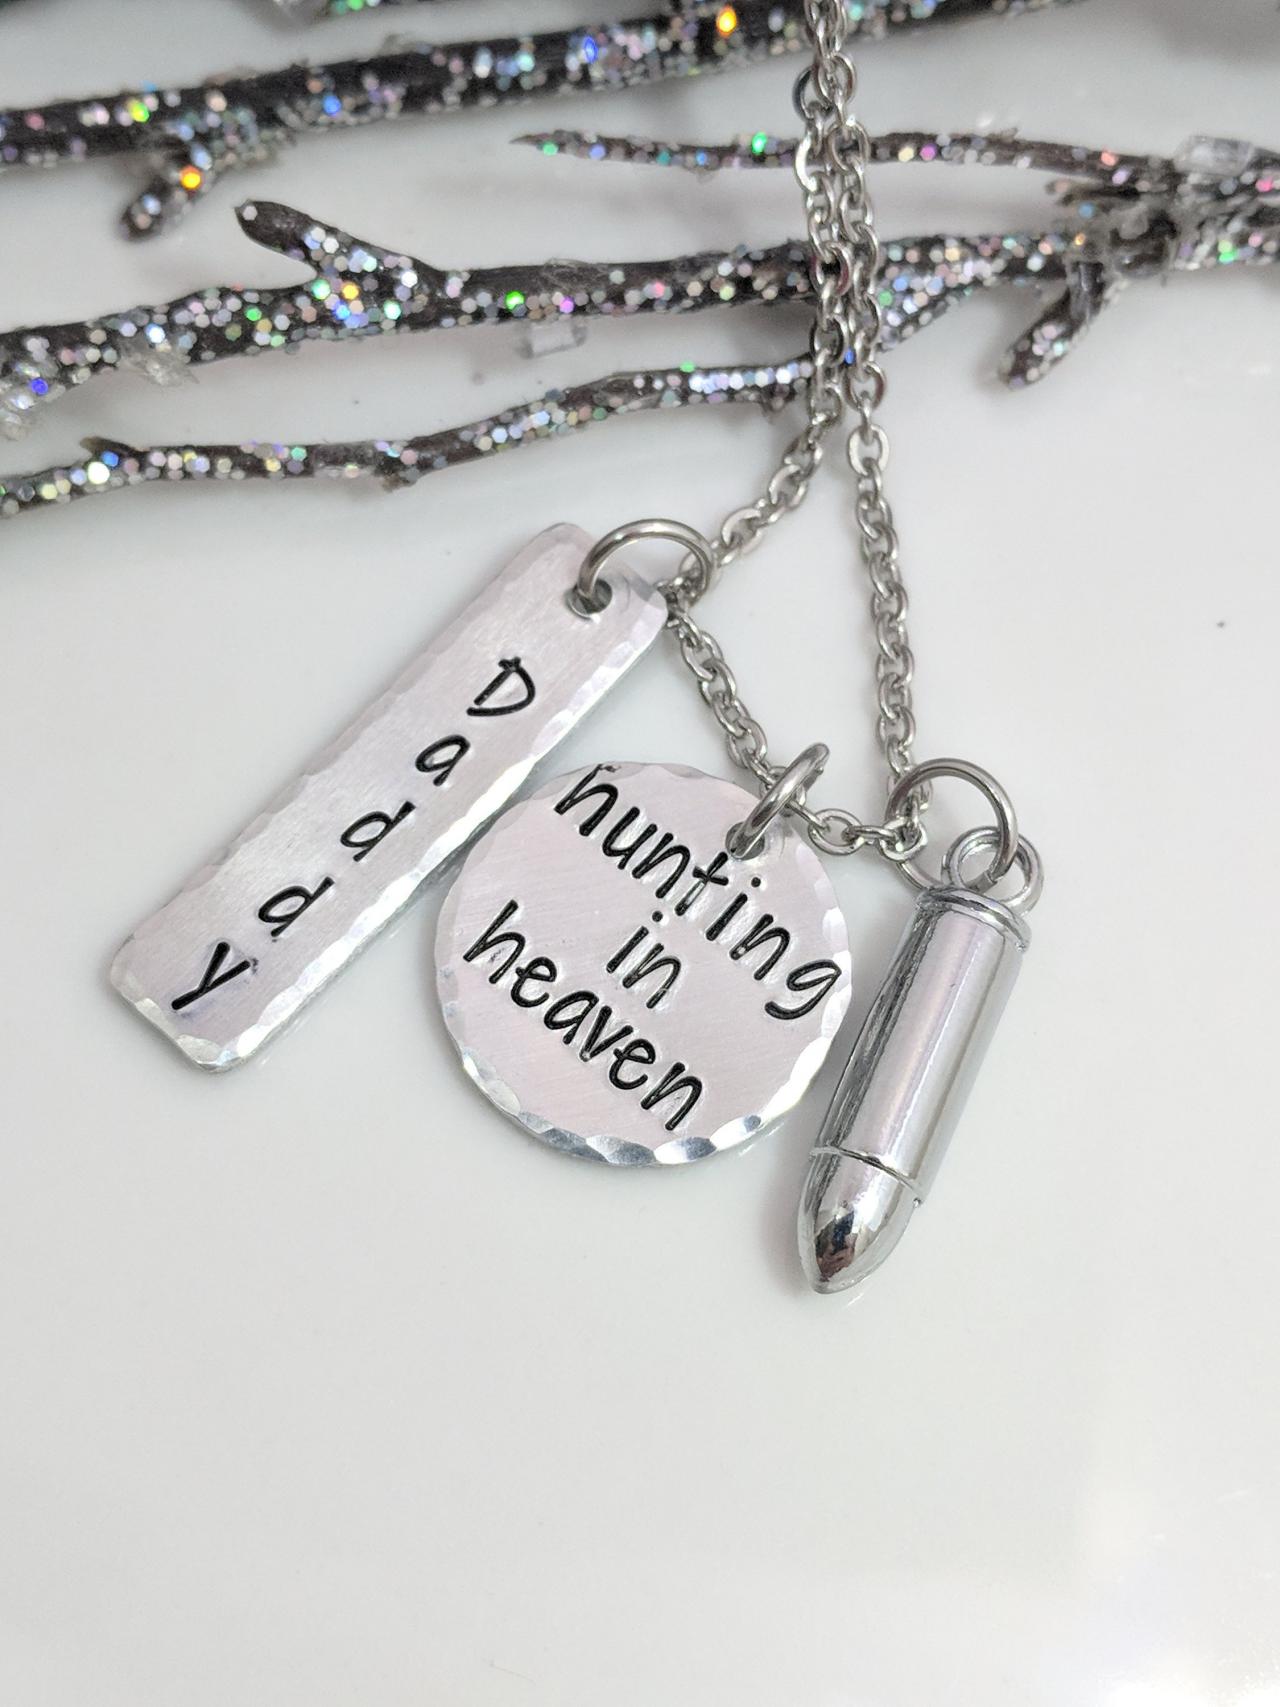 Hunting In Heaven-loss Of Hunter-loss Of Dad-loss Of Grandpa-bullet Necklace-customized-memorial Keepsake-remembrance Jewelry -special Gift